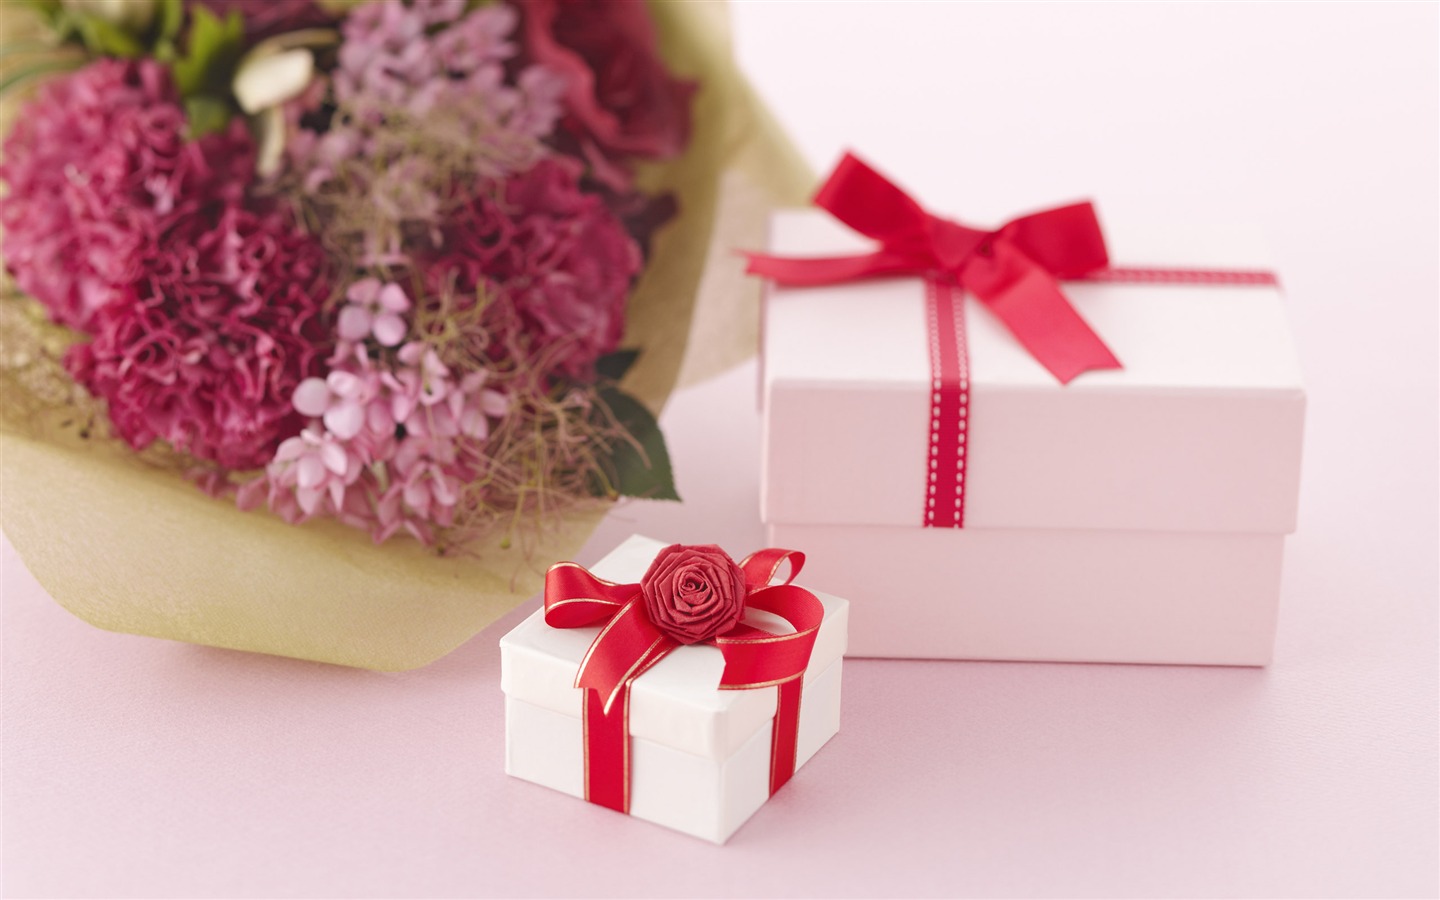 Flowers Gifts HD Wallpapers (1) #19 - 1440x900